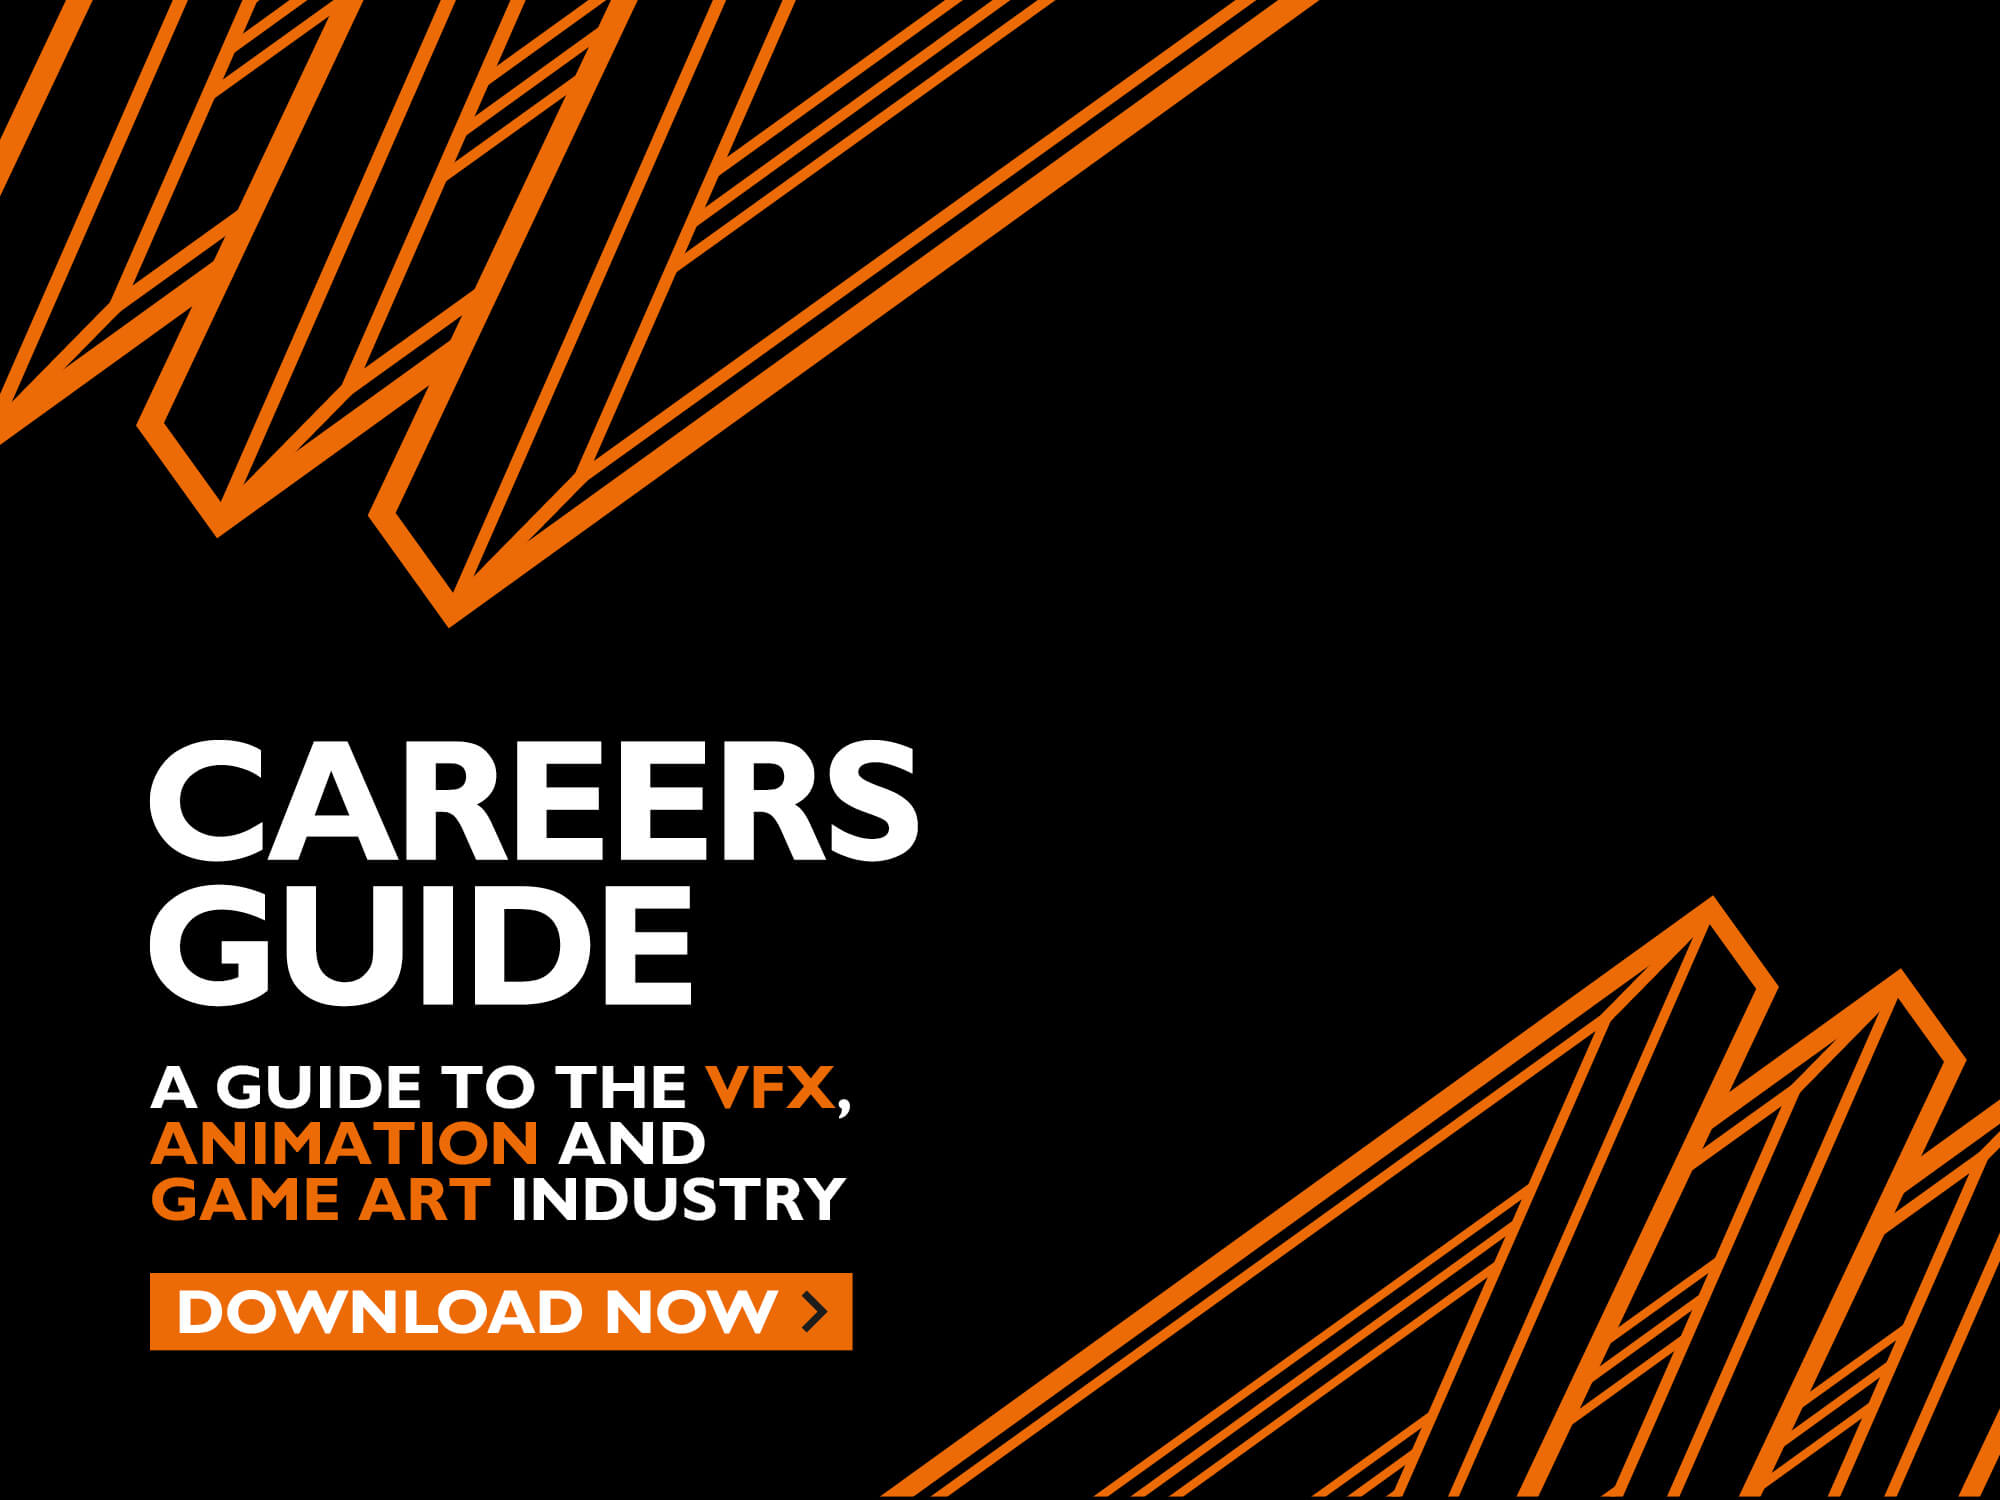 Careers Guide image orange graphic lines on black background